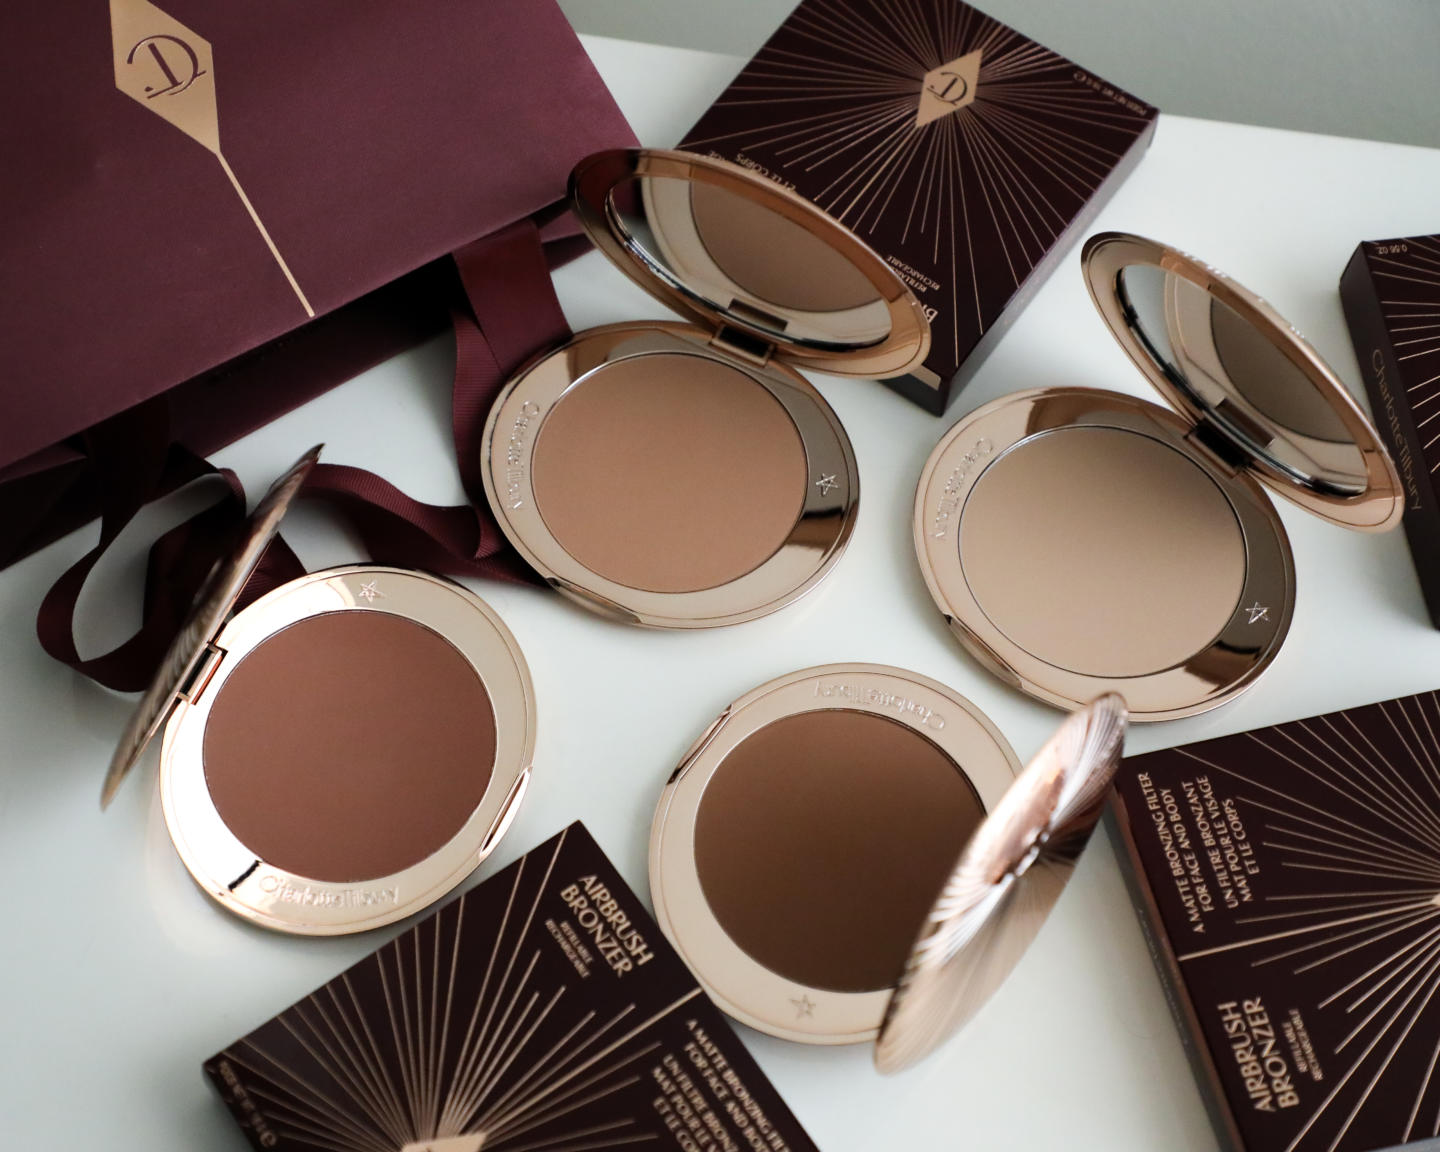 CHARLOTTE TILBURY EARLY ACCESS TO AIRBRUSH BRONZER!